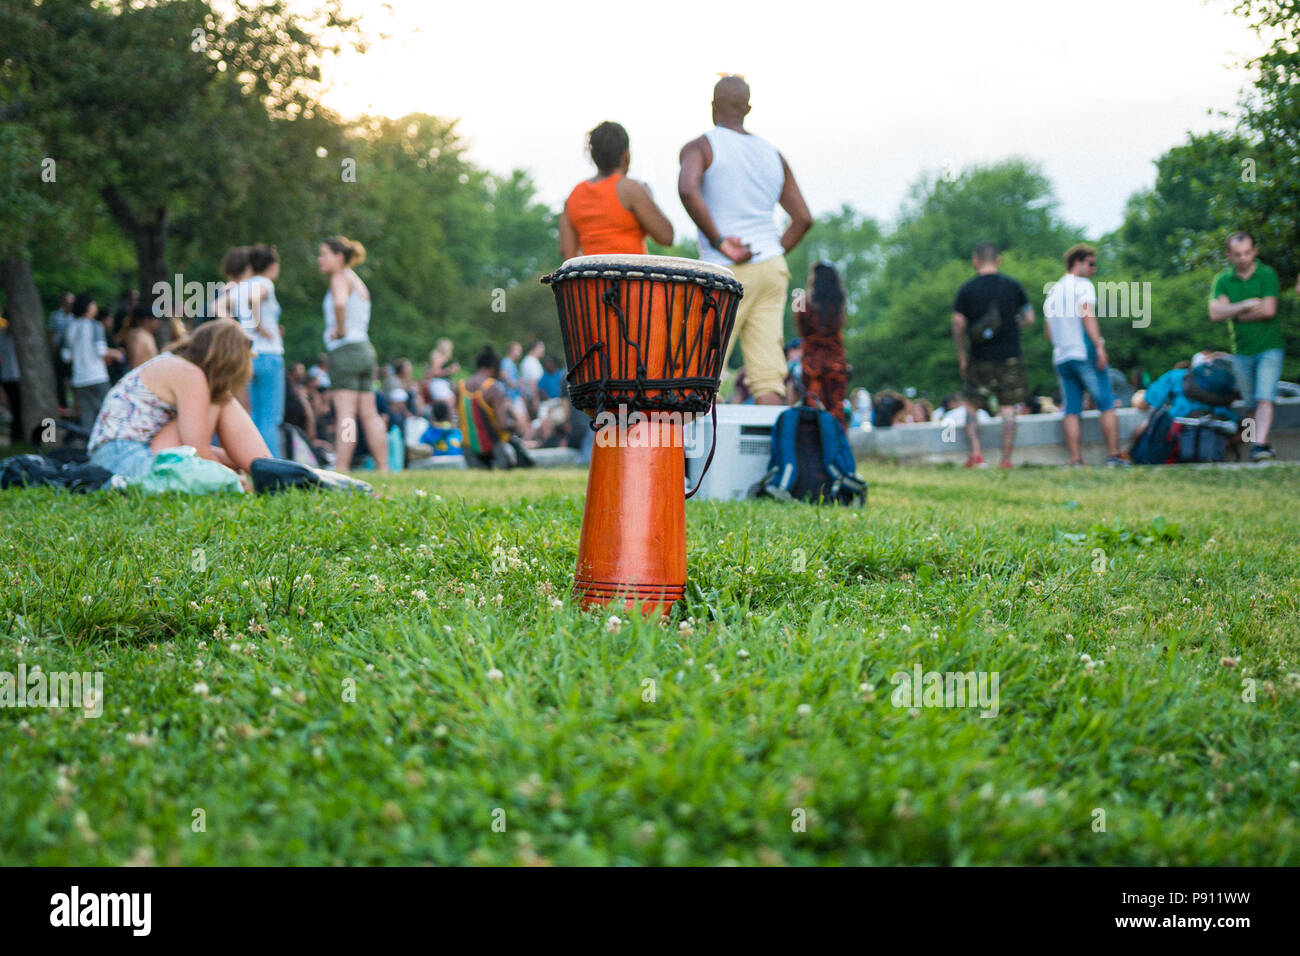 Montreal, Quebec, Canada - 2 July 2017: Two girls observing the famous drum circle Tam Tams in Parc du Mont Royal at the base of Mont Royal in Montrea Stock Photo